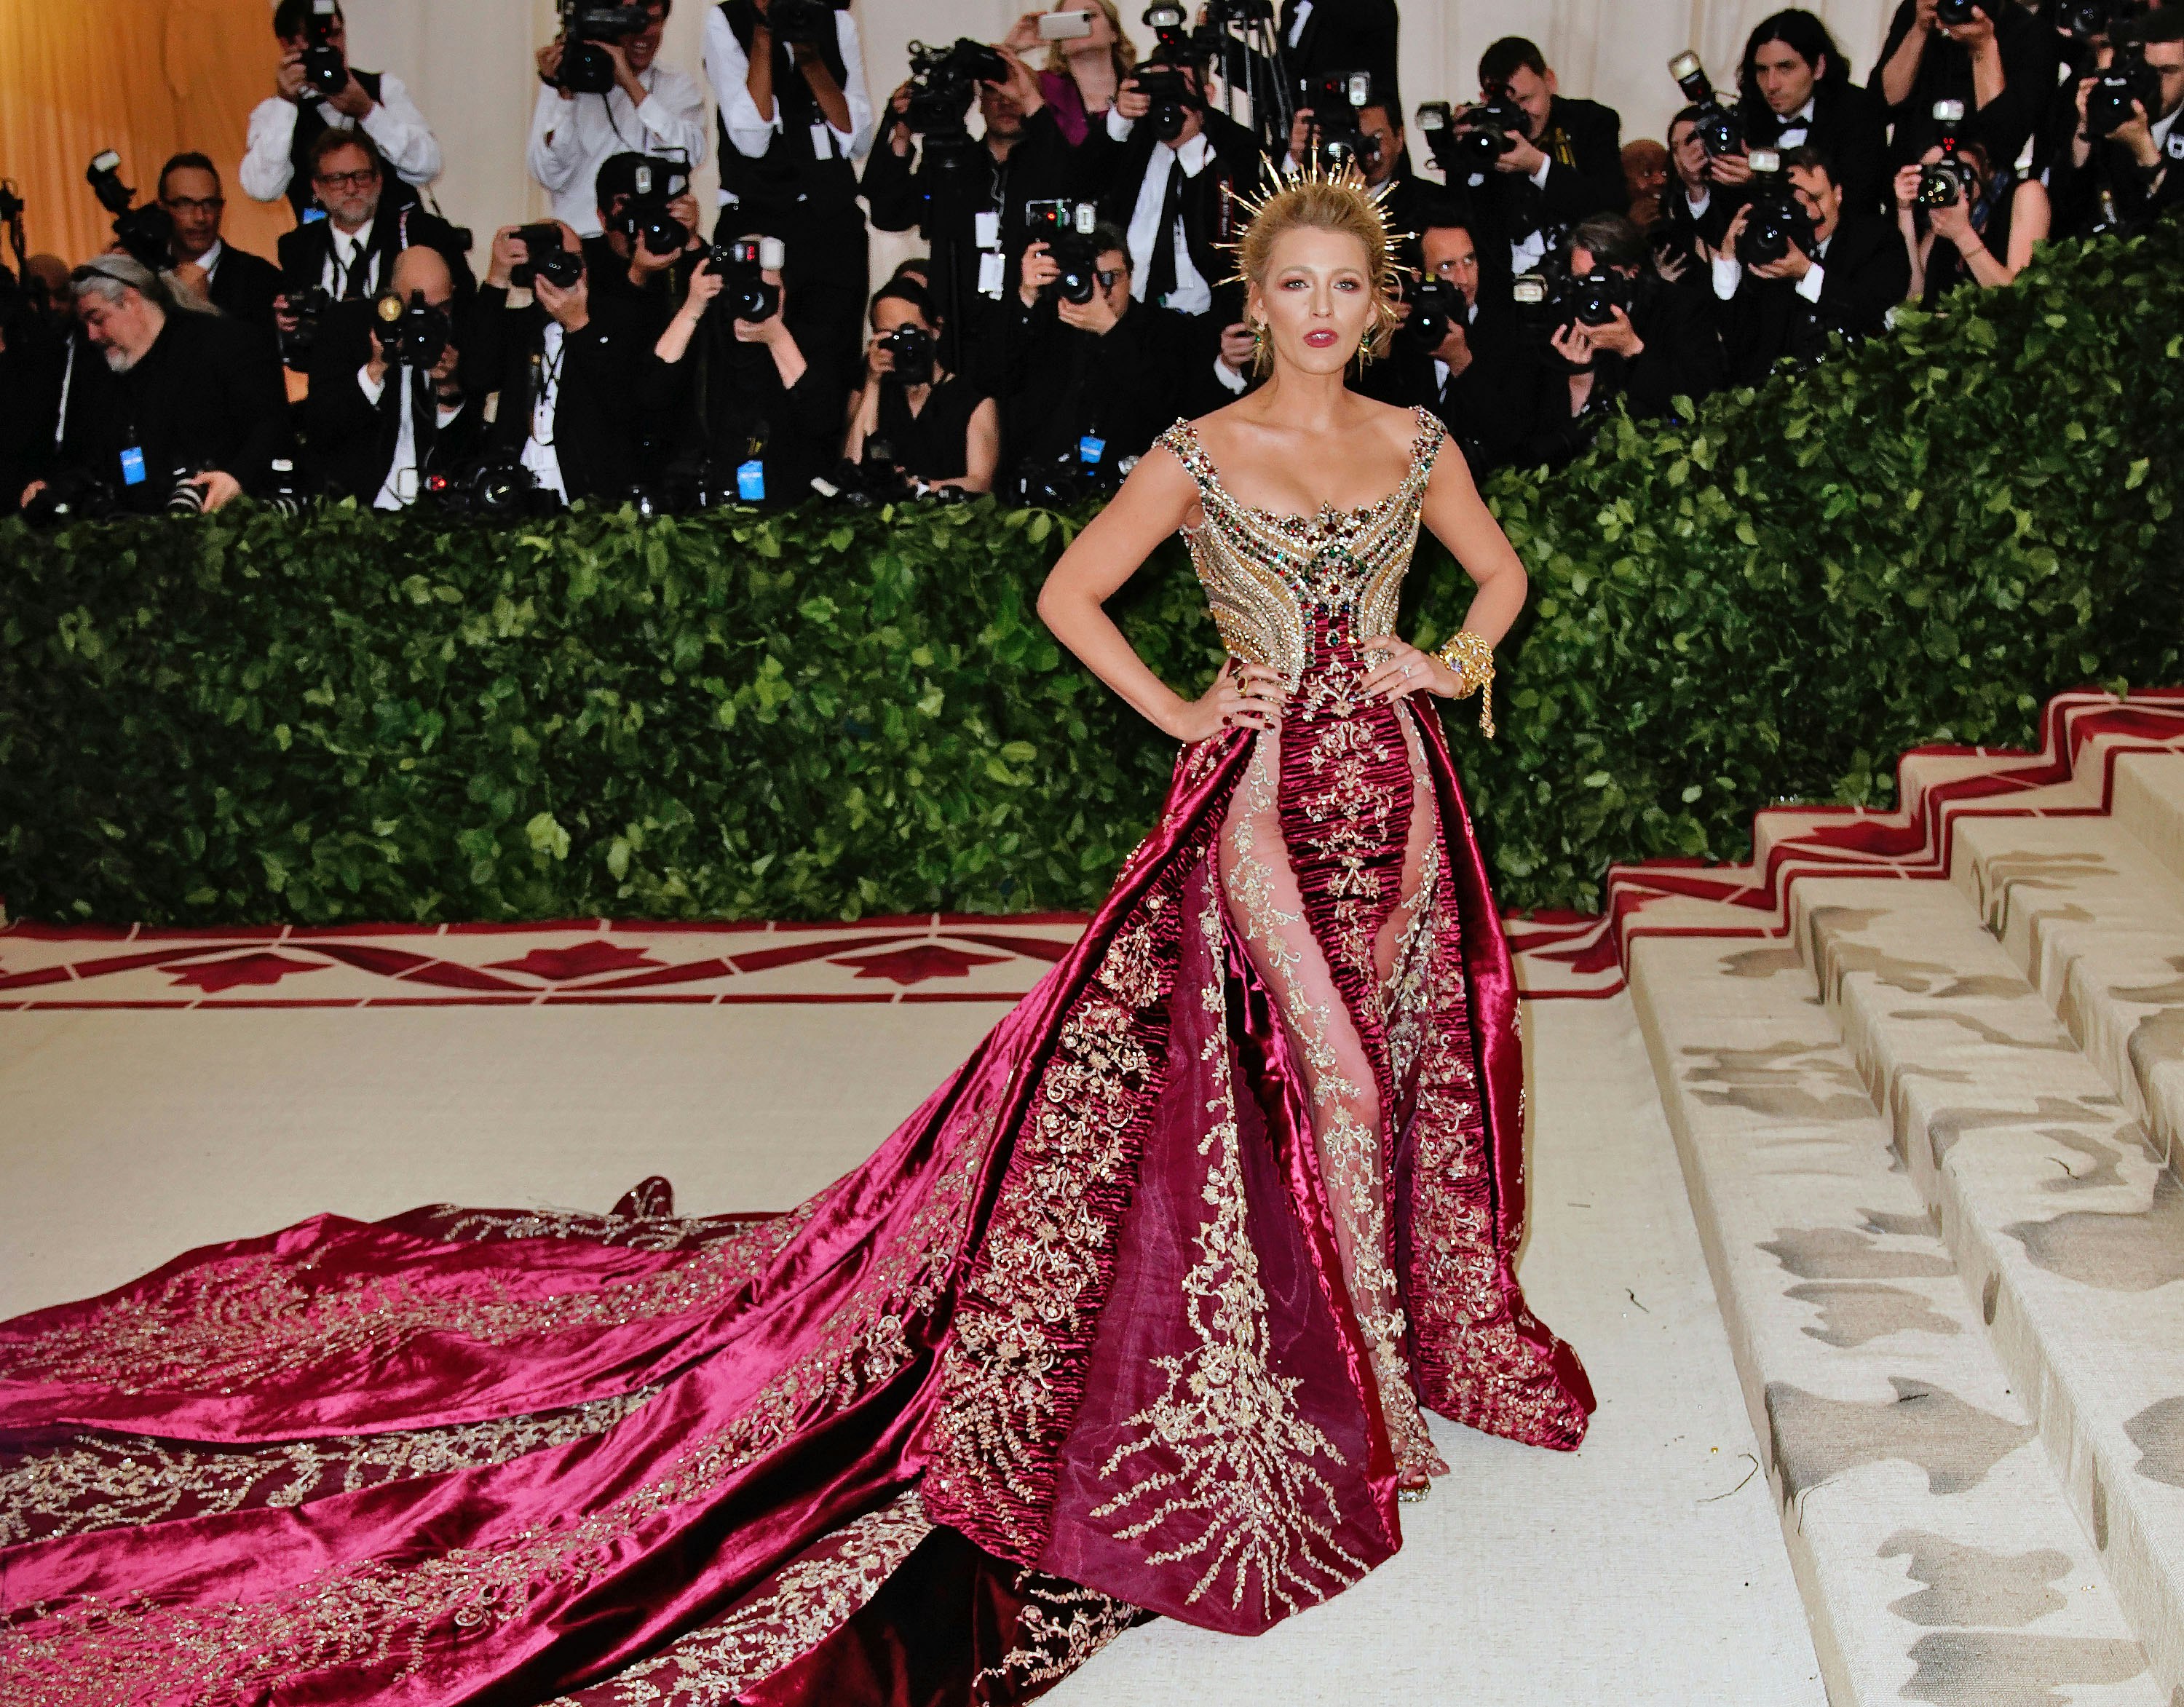 Blake Lively Wore Sneakers Under Her Gown on the Red Carpet for